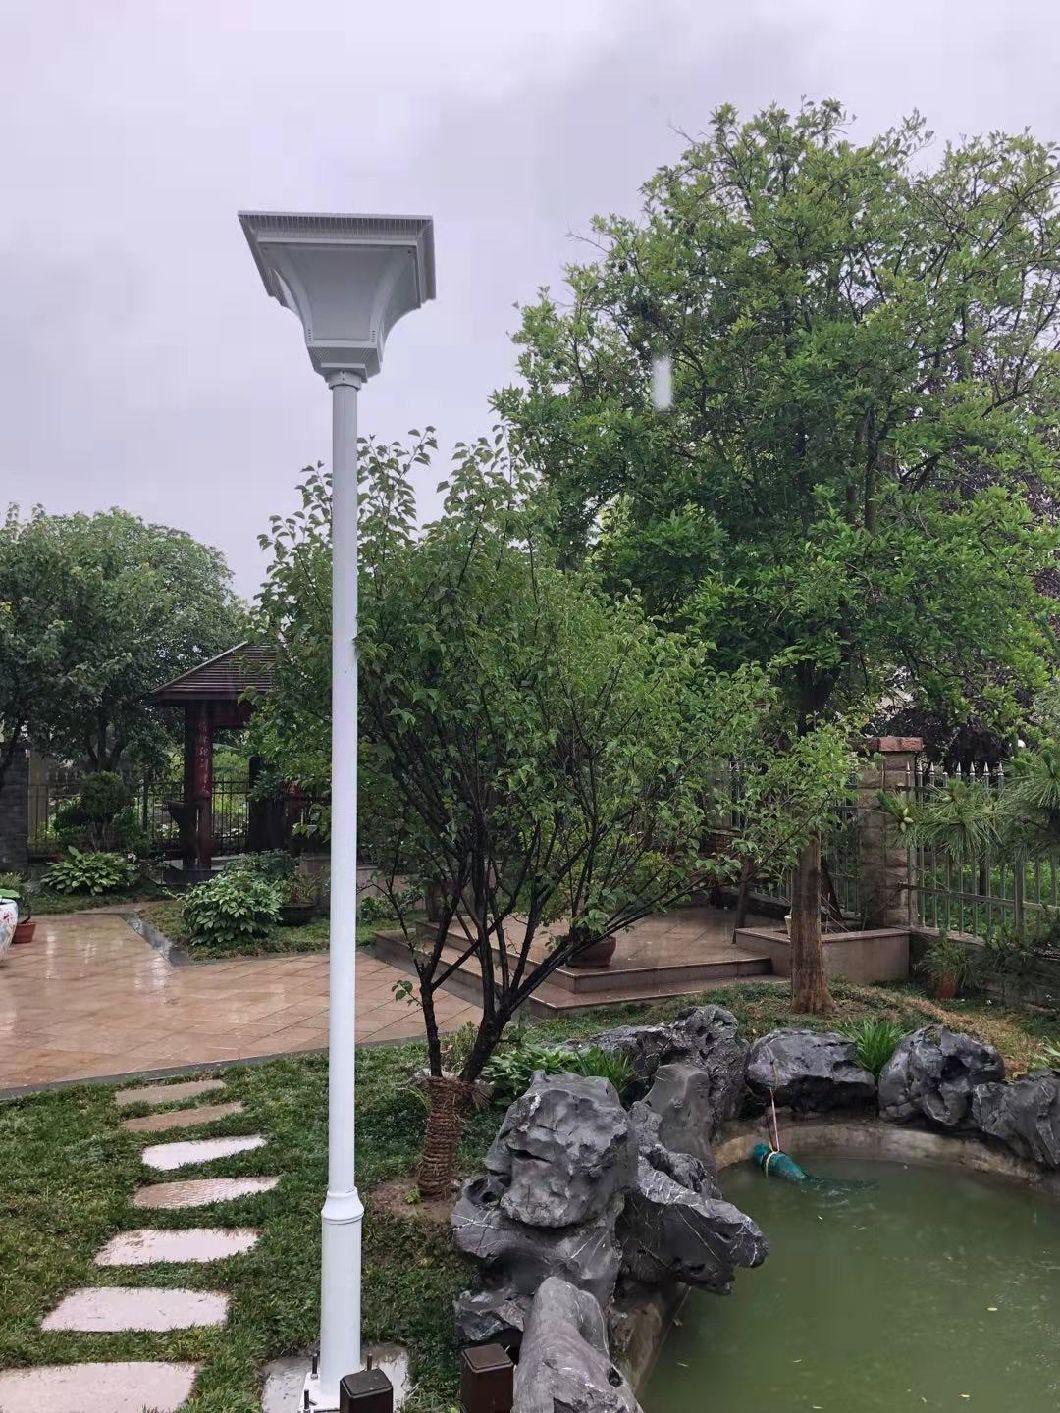 LED Outdoor Lighting Solar Home System 50W All in One Solar Street Garden Light Lamp Energy Saving Home System Wall Underwater Pool Lights